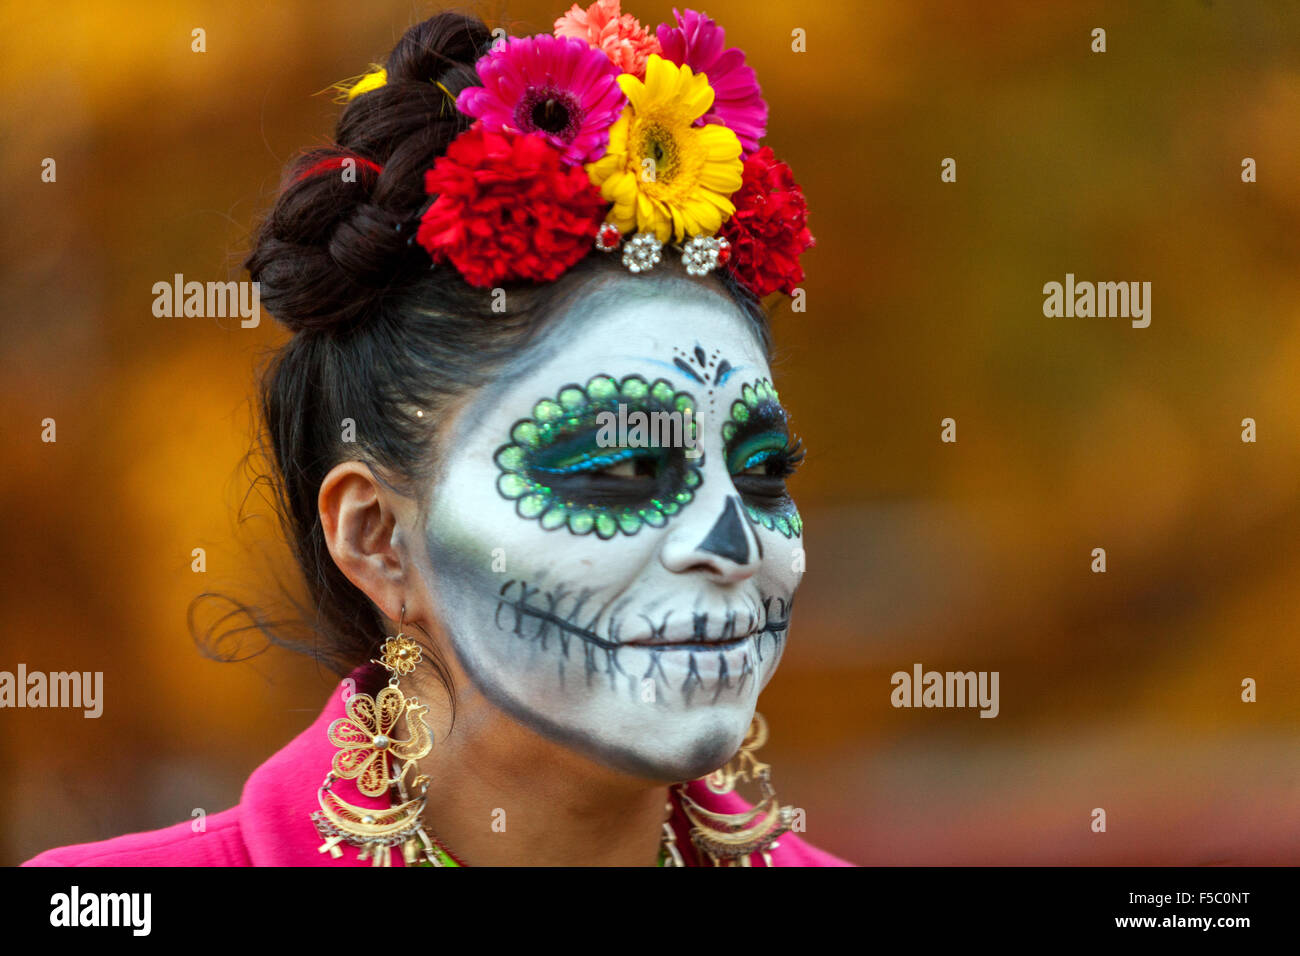 Woman in makeup for Day of the Dead mask Stock Photo